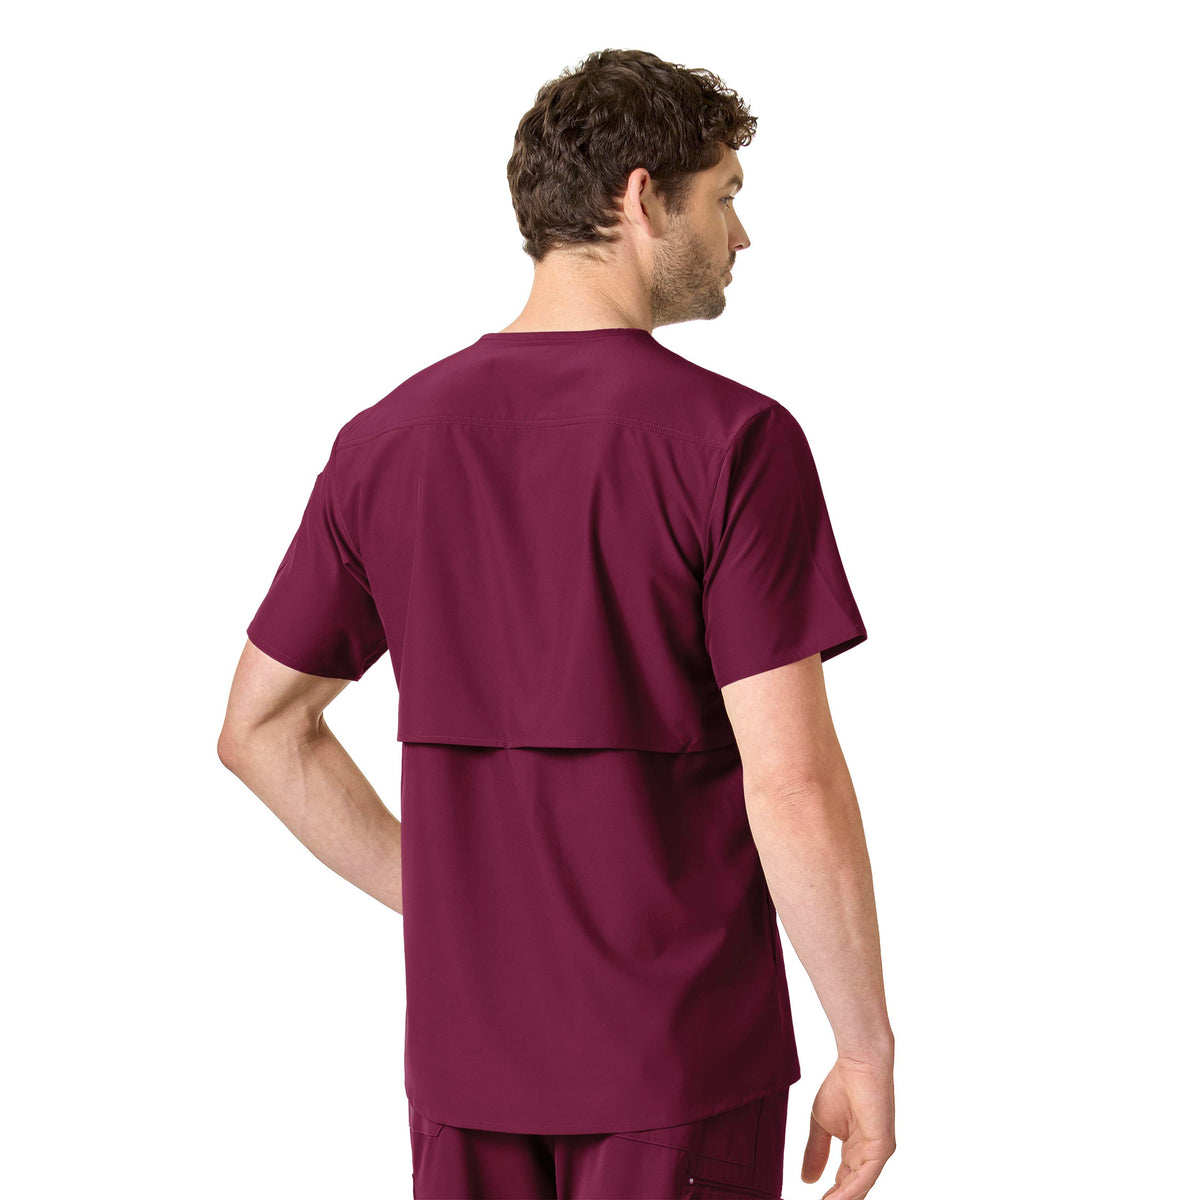 Force Liberty Men's Twill Chest Pocket Scrub Top Wine back view